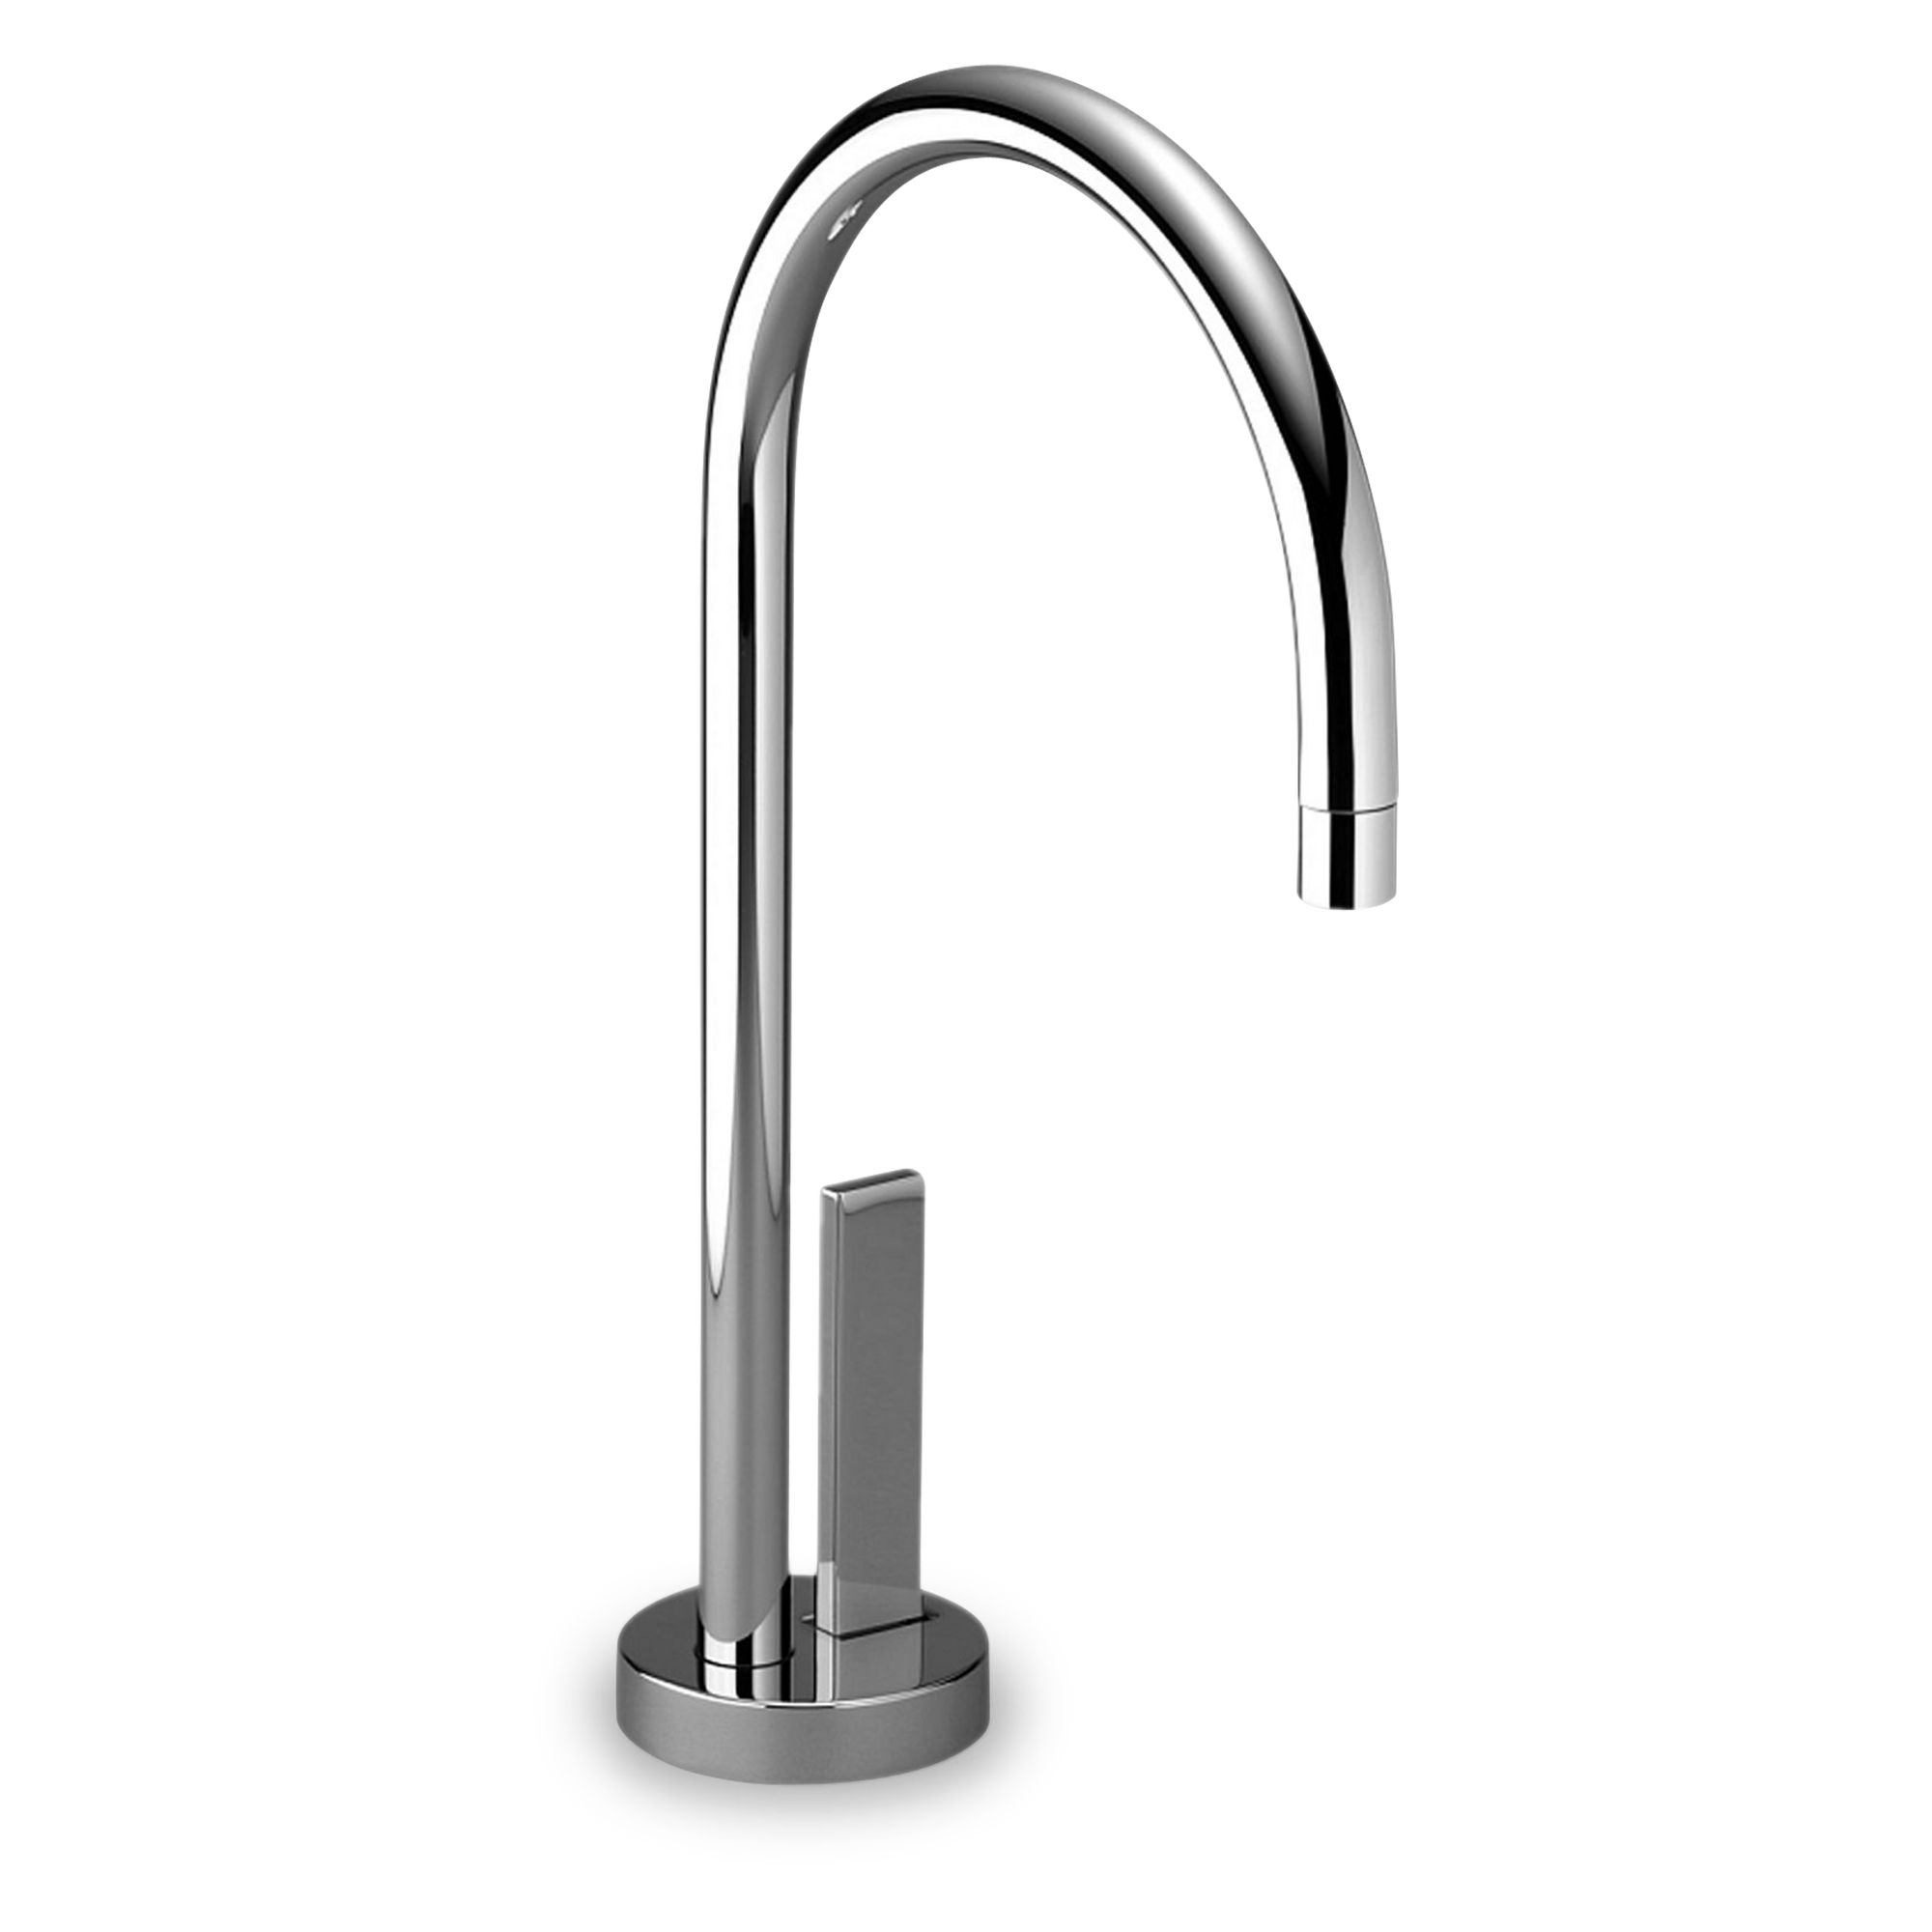 A seamless faucet that will give your kitchen a touch of modern elegance.